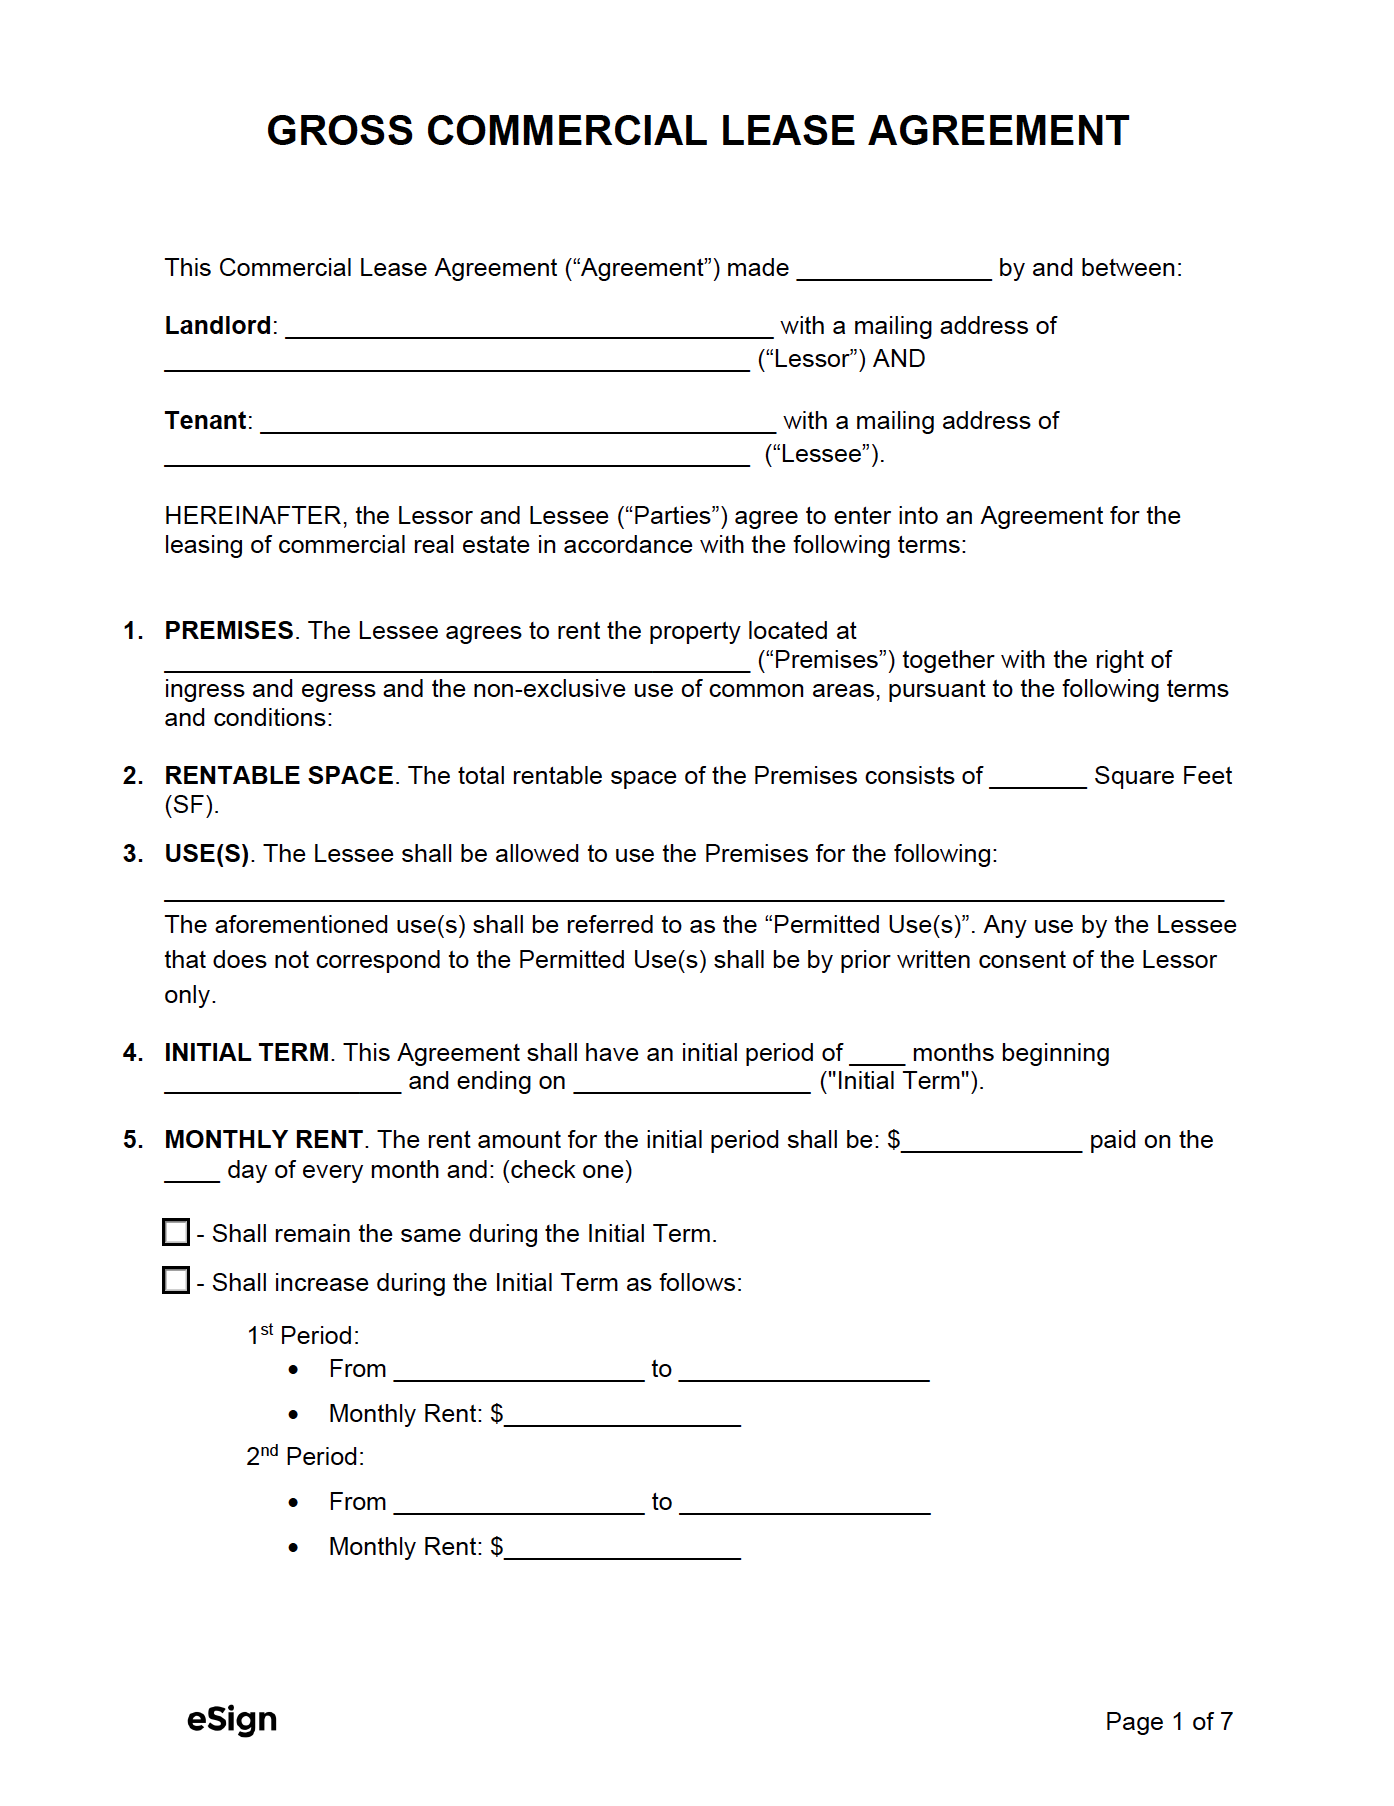 free-gross-commercial-lease-agreement-pdf-word